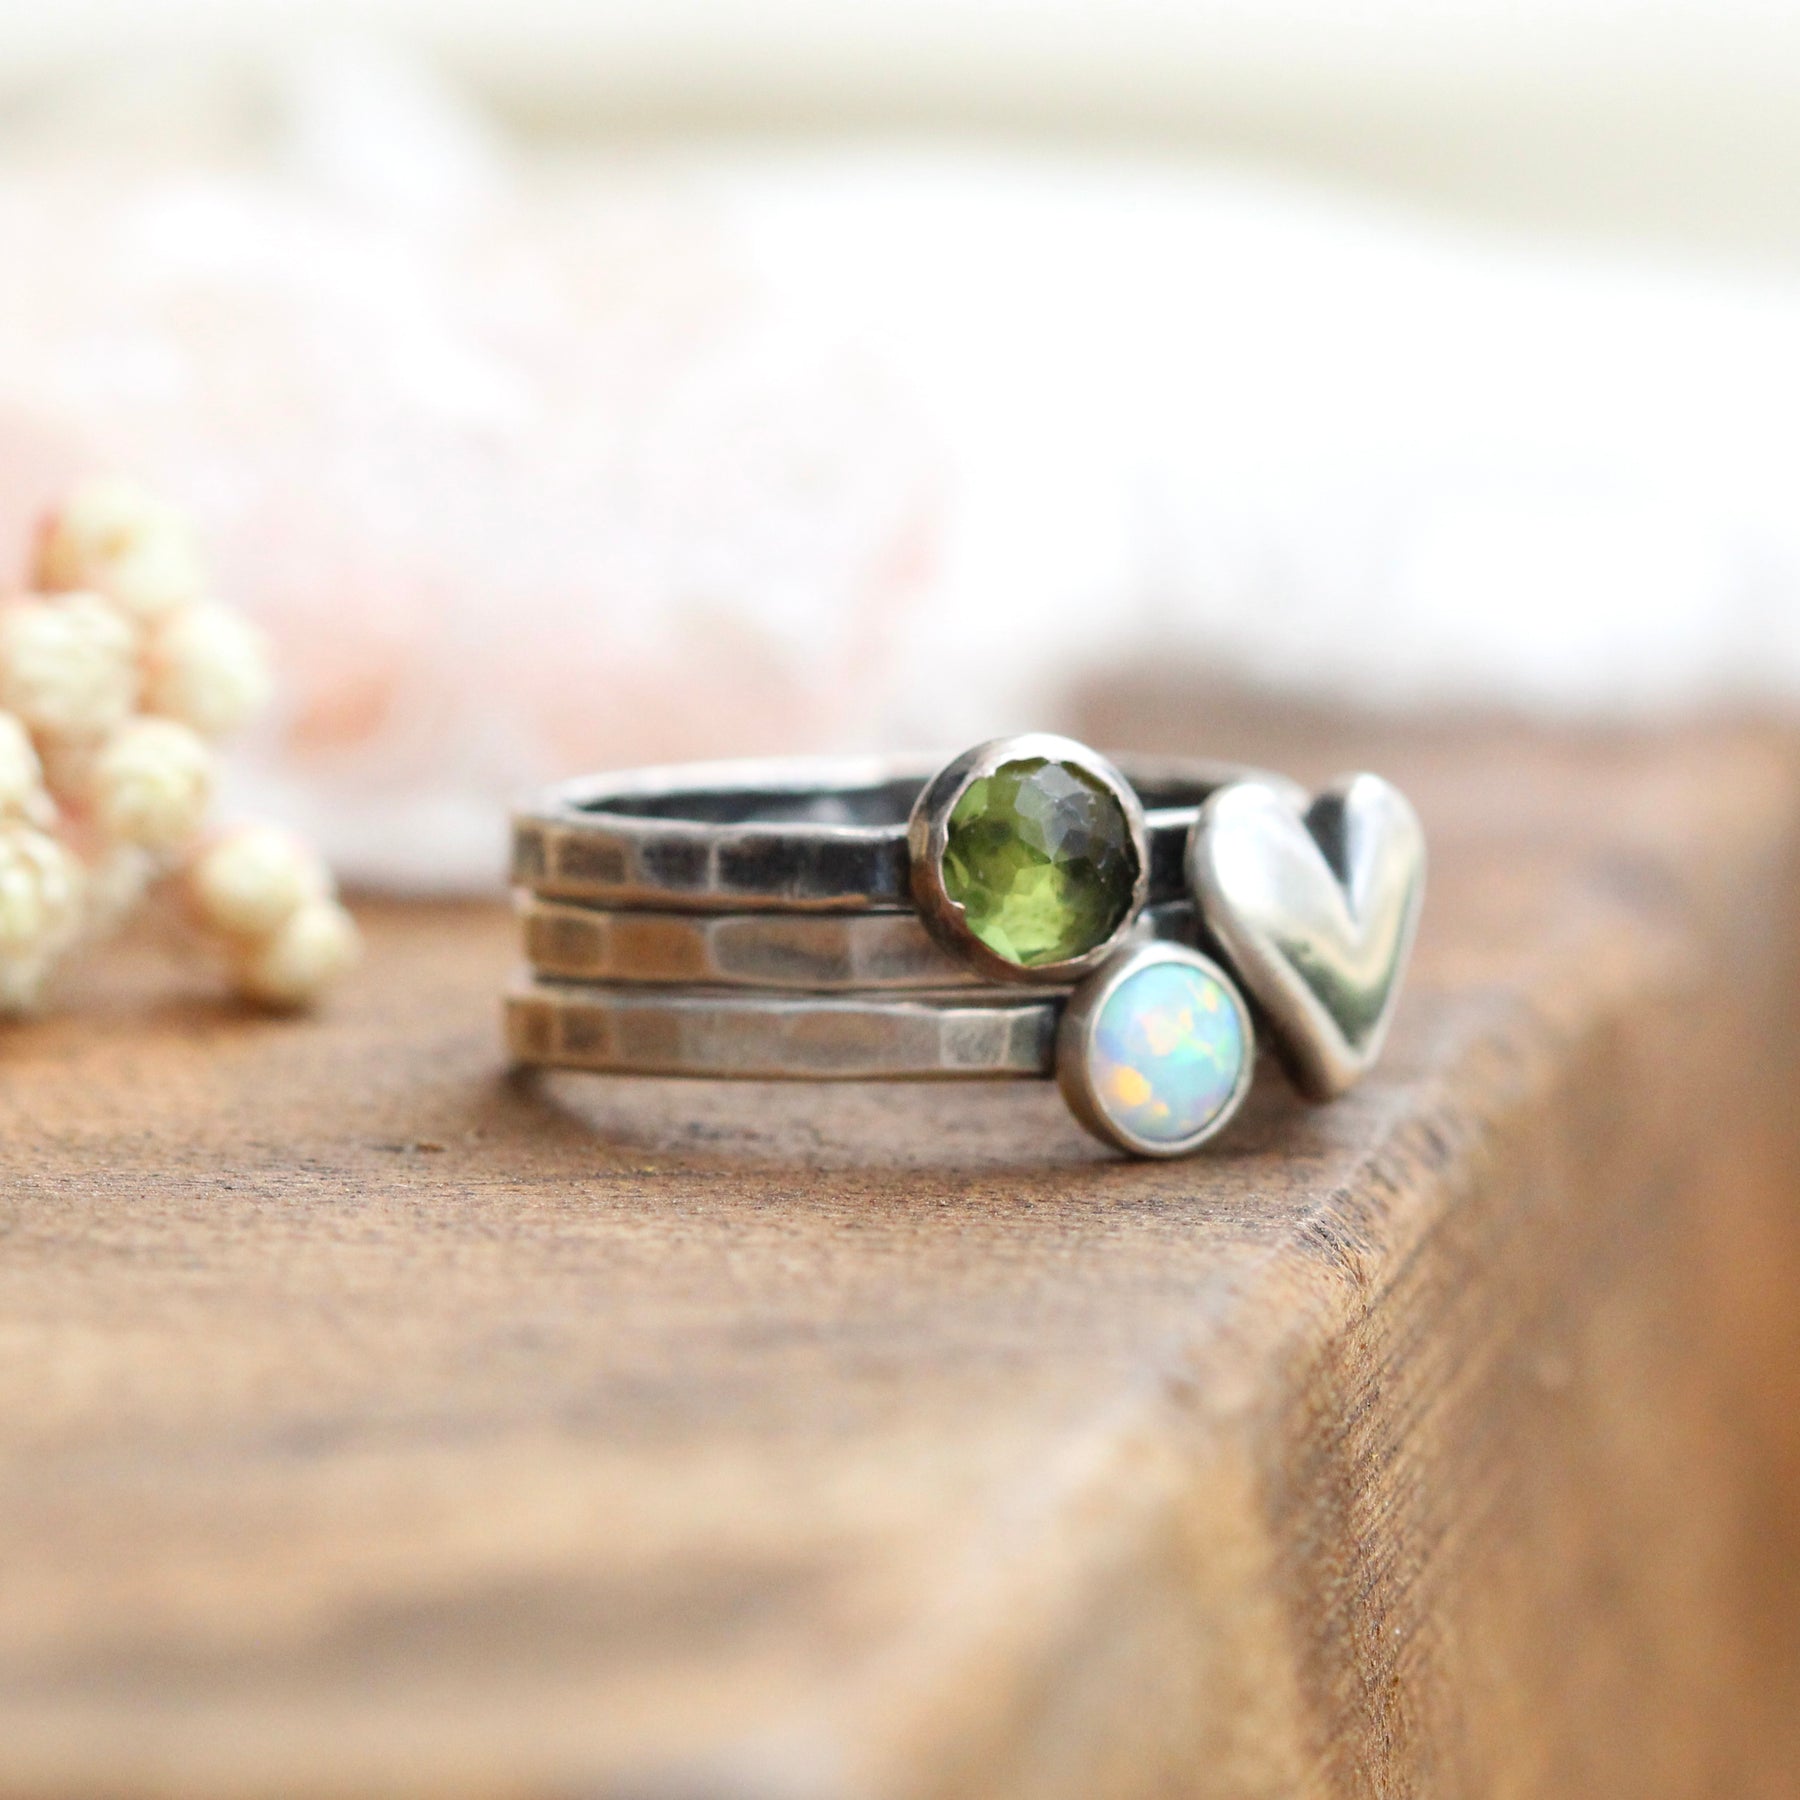 Heart and Stone stacking ring set